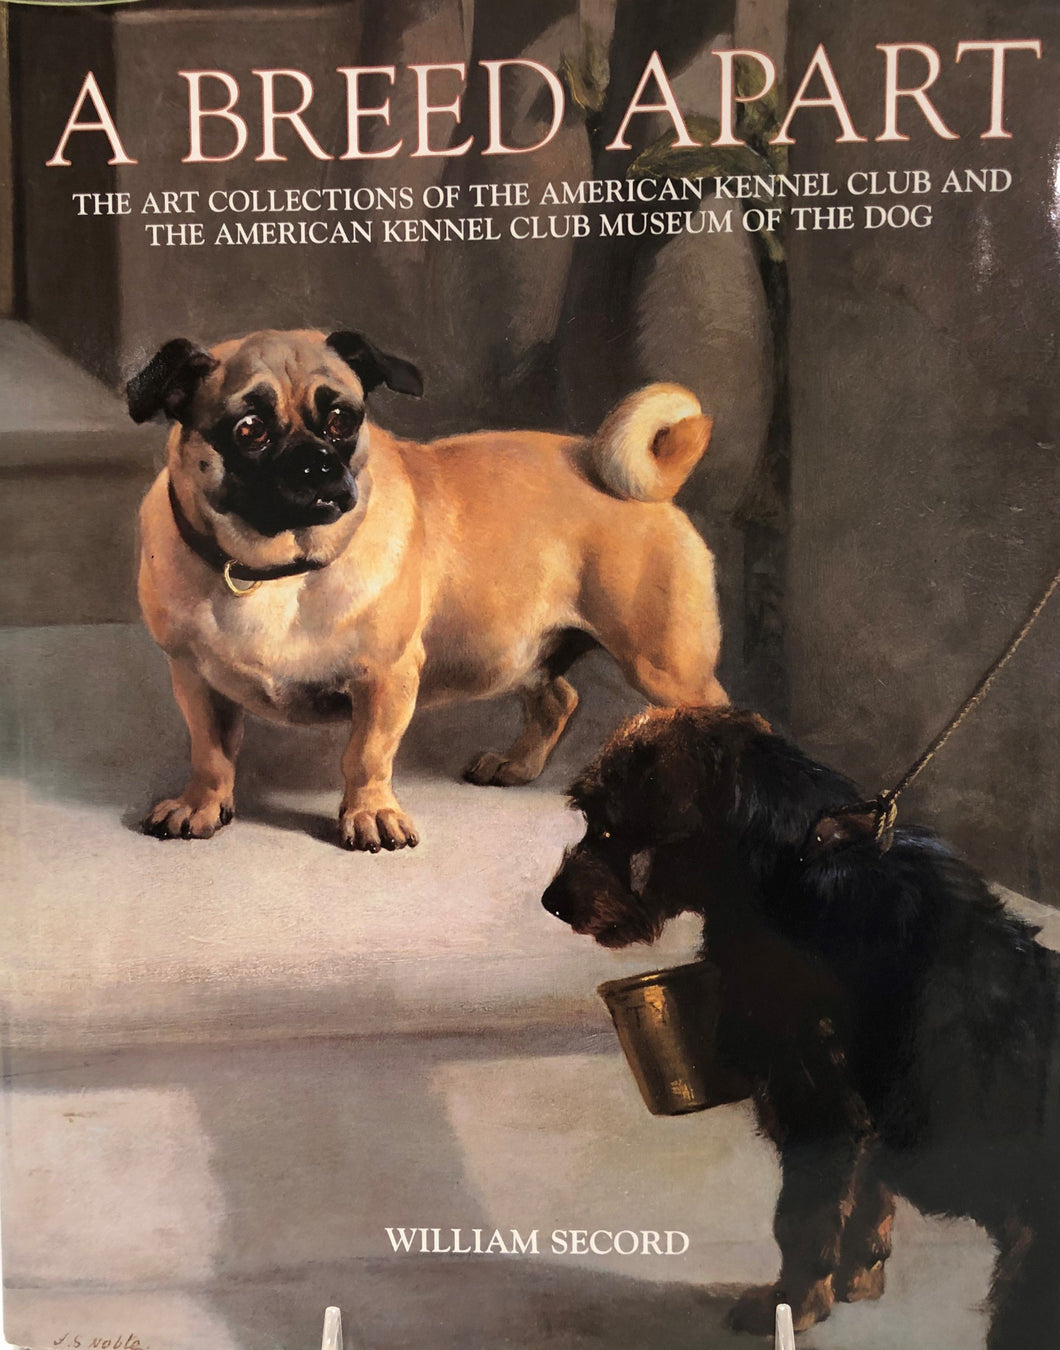 A Breed Apart: The Art Collections of the American Kennel Club and American Kennel Club Museum of the Dog